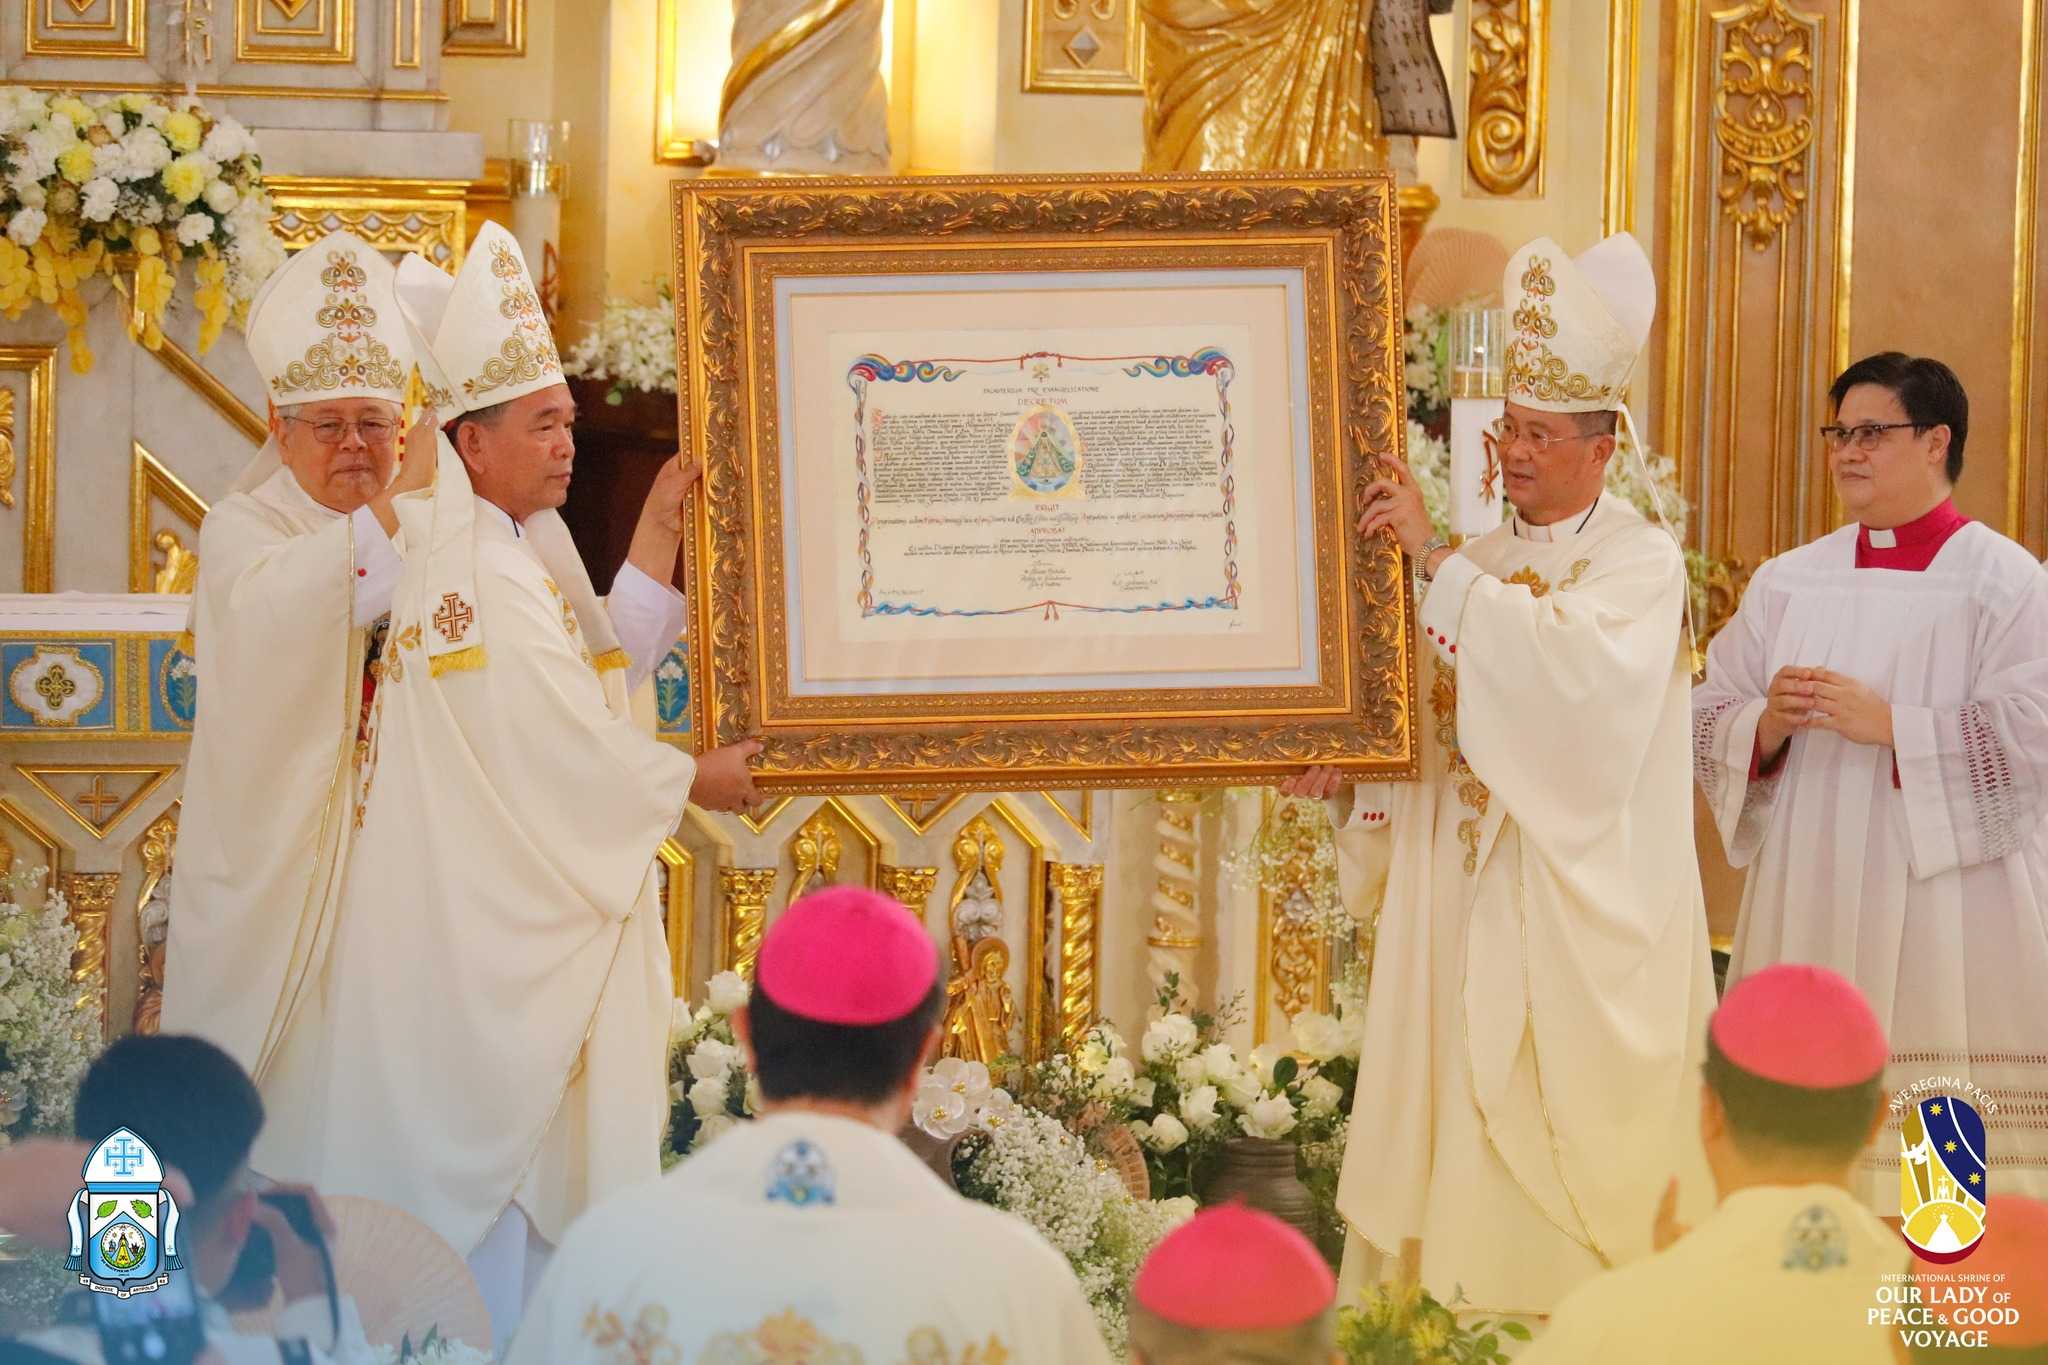 Antipolo Cathedral declared as PH’s first international shrine